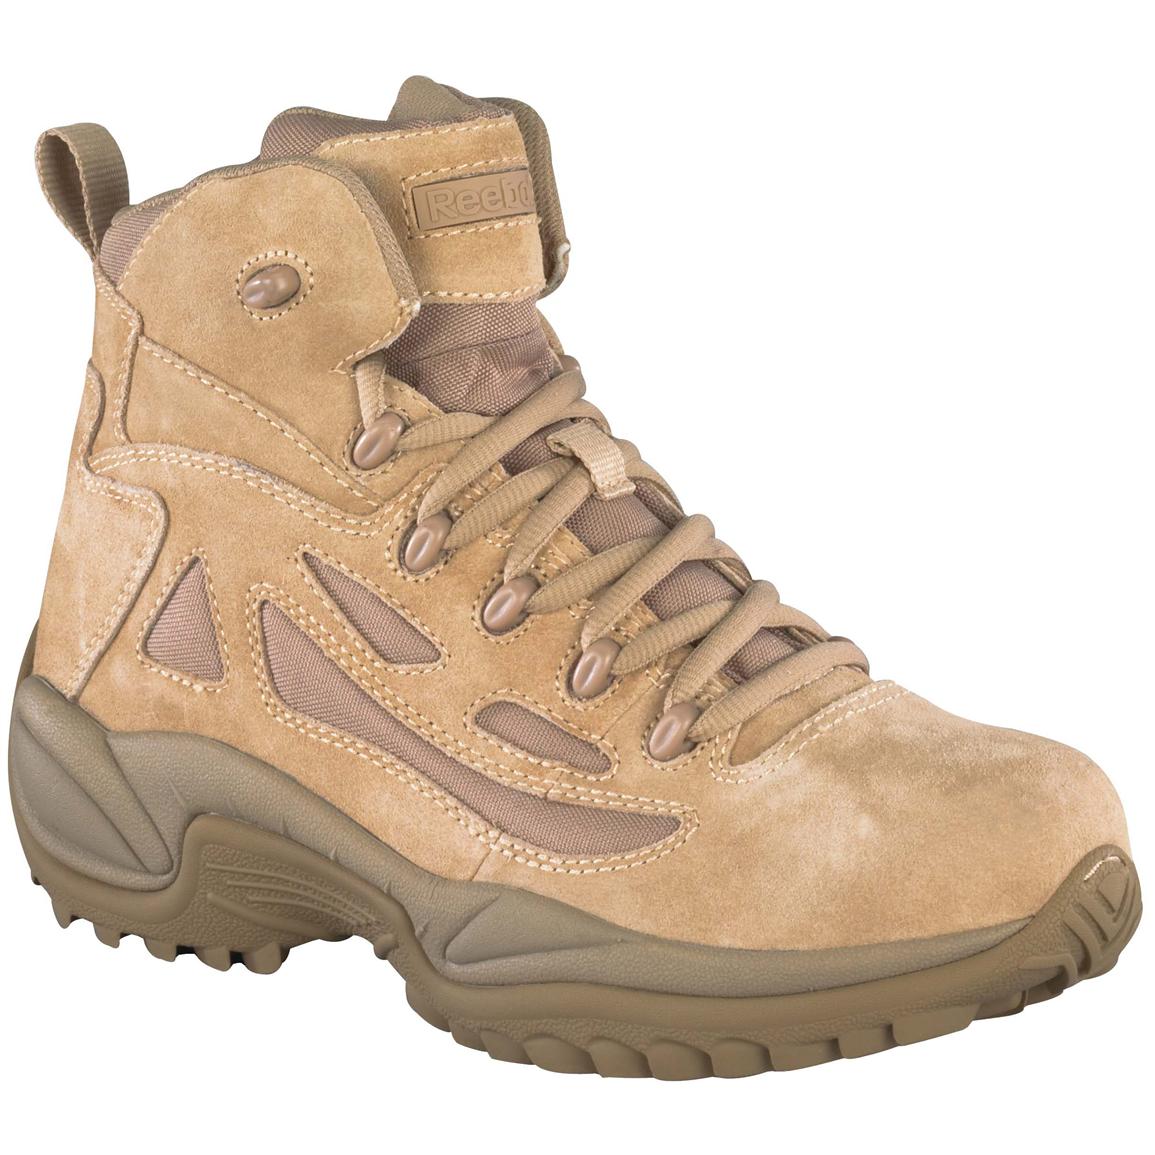 Reebok Men's Tactical Military Desert Tan Stealth Boots 6 Inch Side Zip Soft Toe